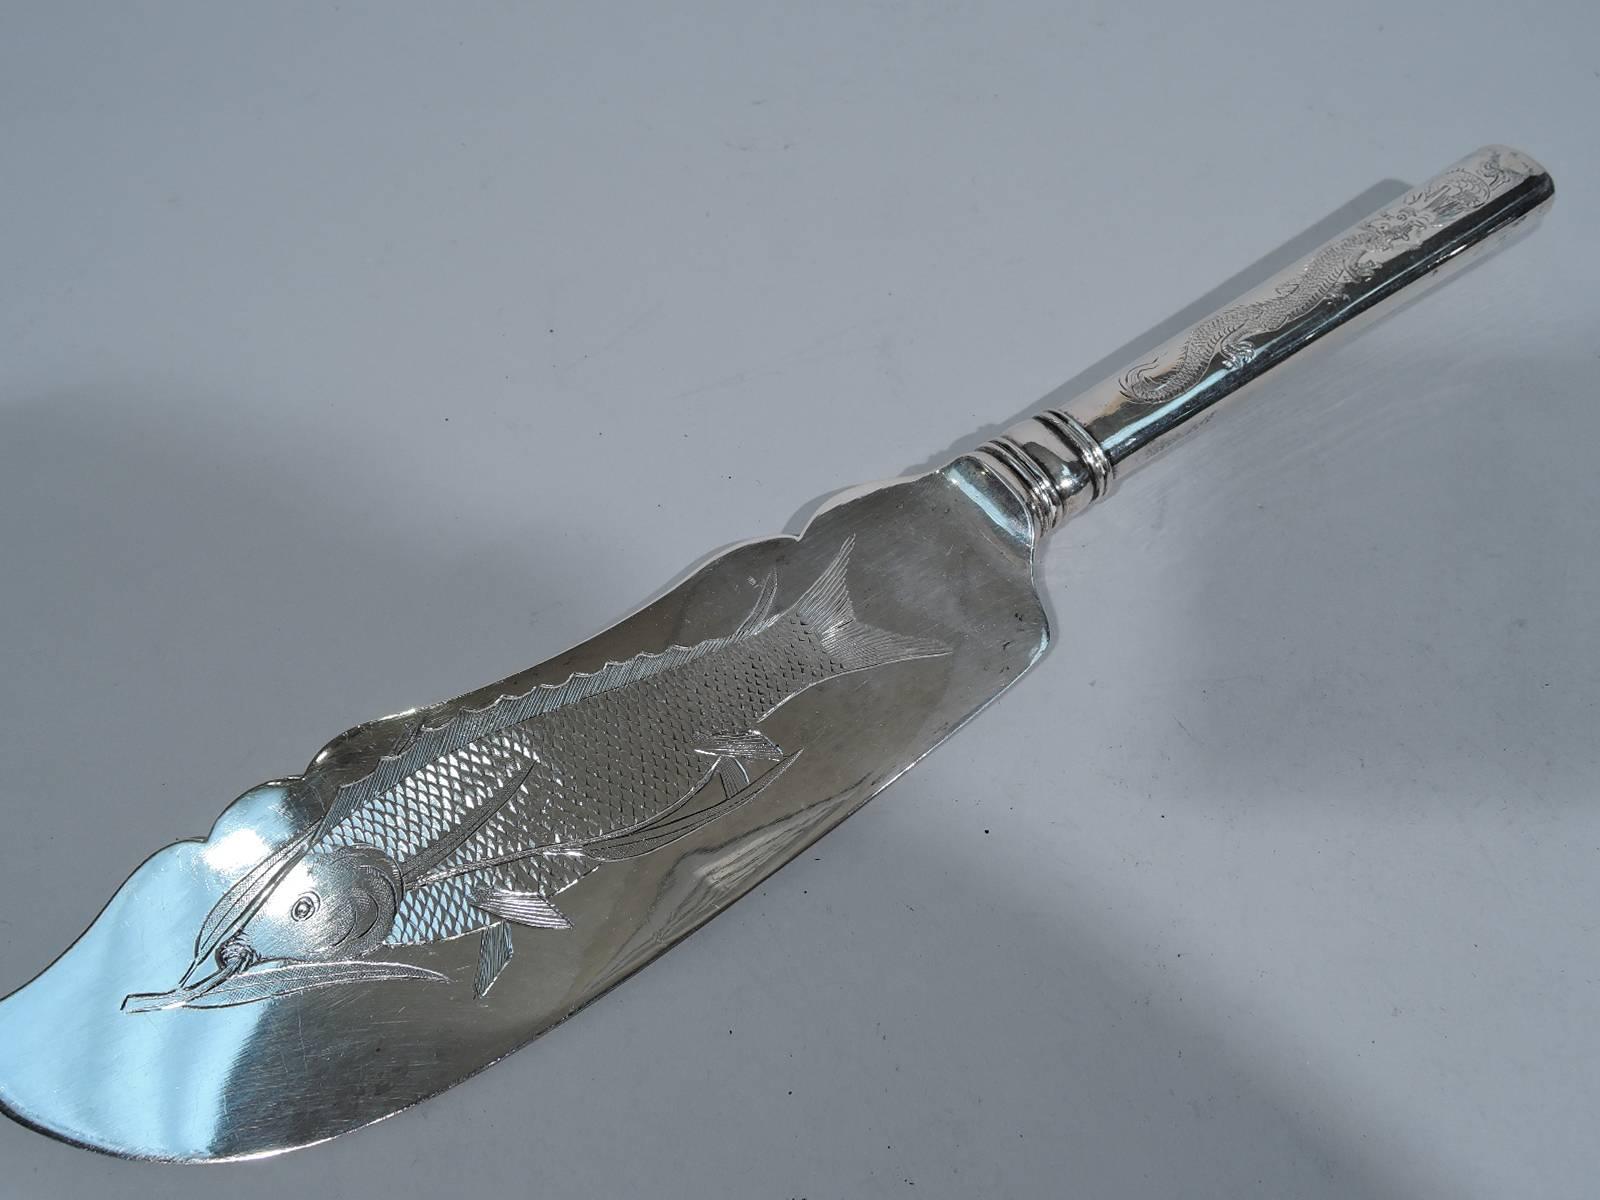 Chinese export silver fish serving pair, circa 1910. This pair comprises fork and slice. Both handles have engraved scary, scaly dragon. Both blade and shank have engraved depiction of dinner (that is, a fish). A fun special occasion set. Hallmark